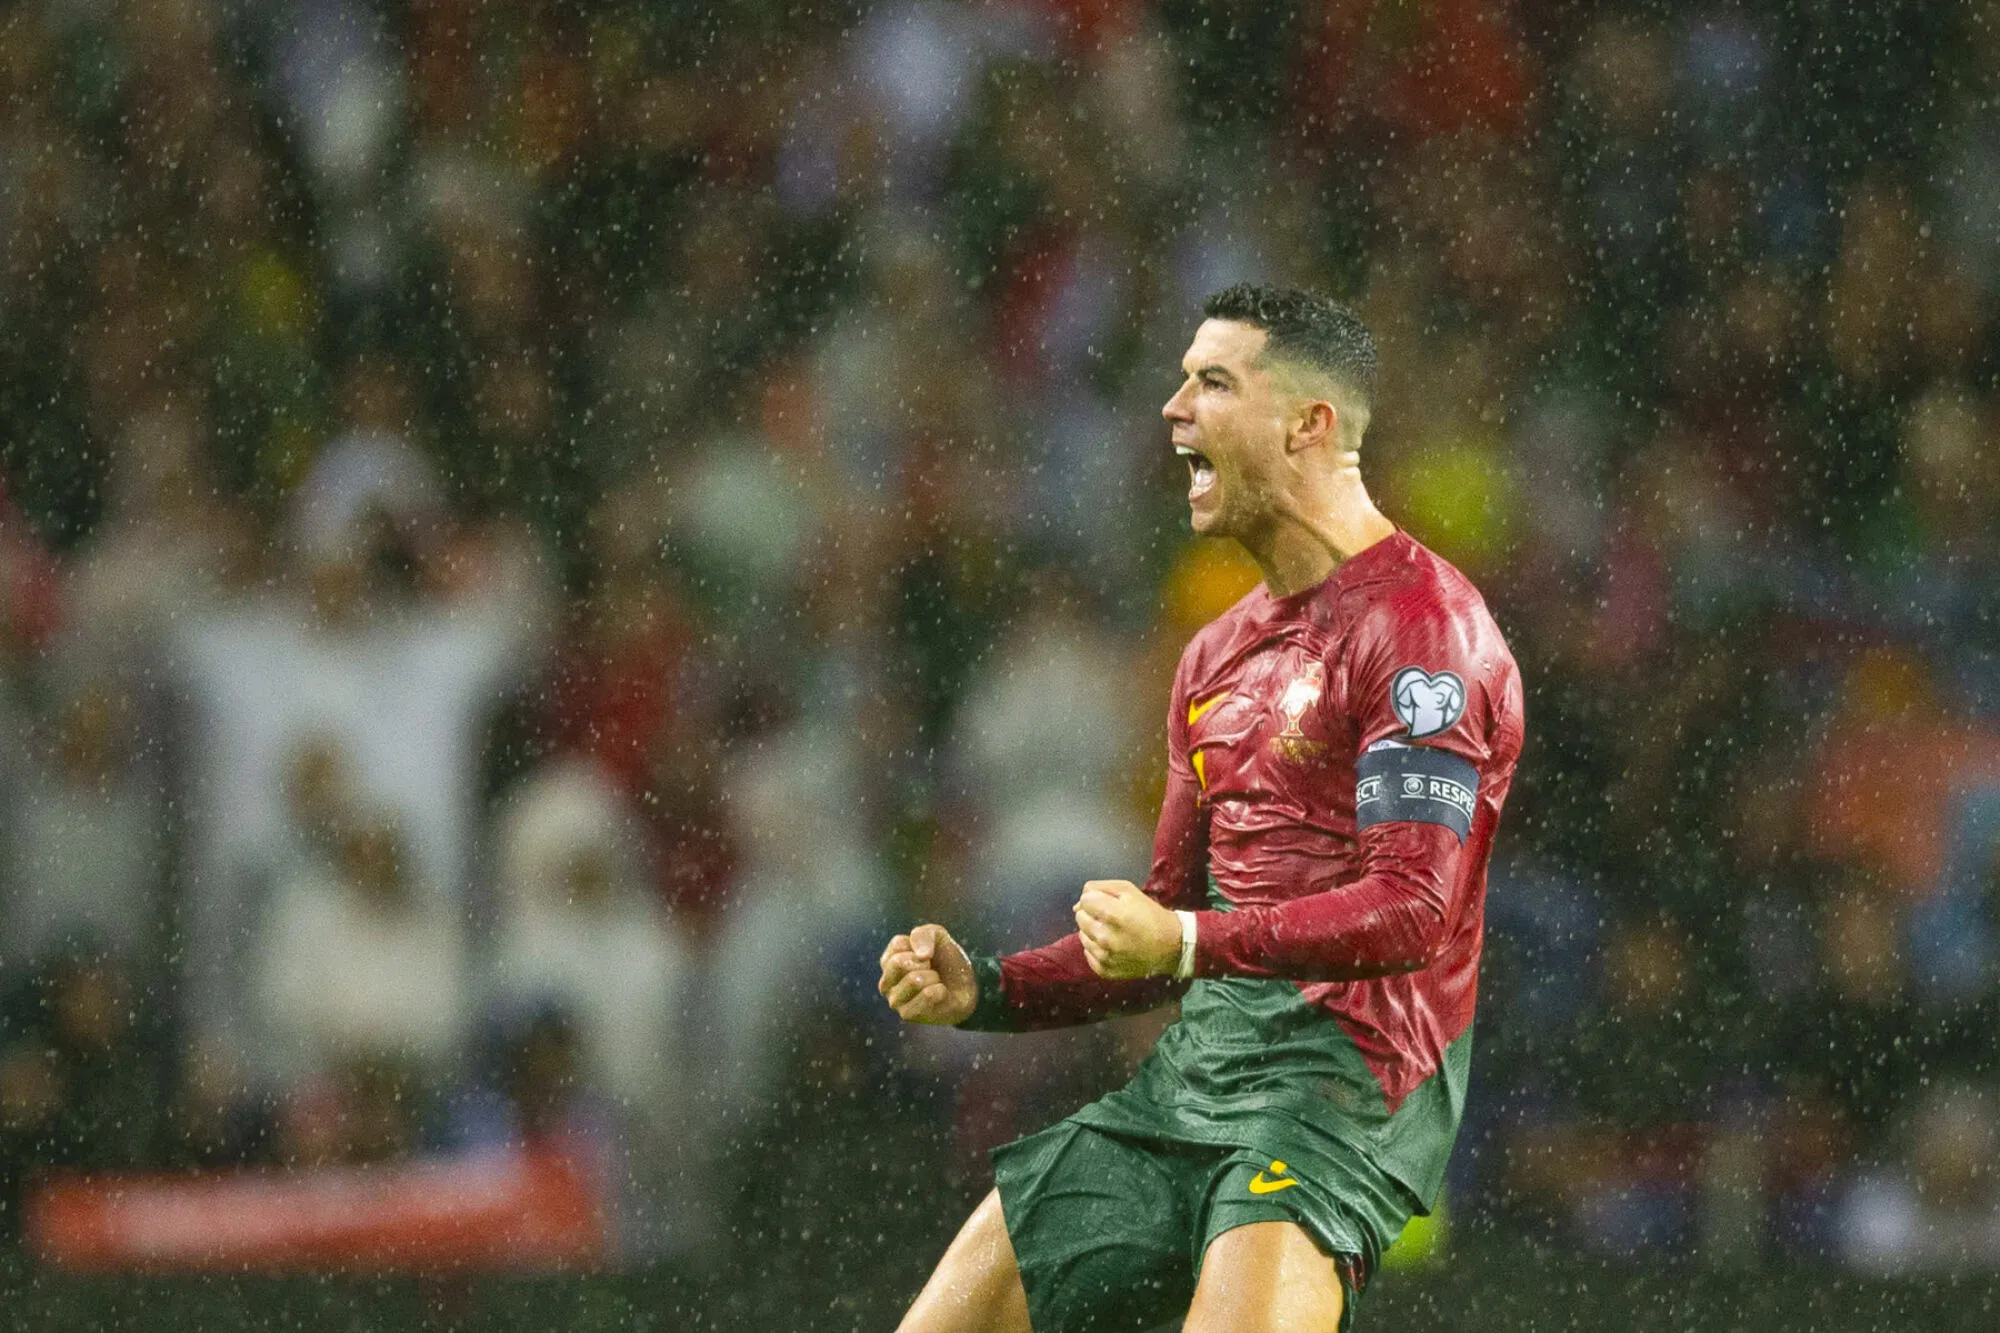 Porto, 13/10/2023 - Portugal hosted Slovakia this evening at the Dragão stadium, in the 7th round of Group J for the qualification of the 2024 European Championship. Cristiano Ronaldo's goal celebelebrated (Pedro Correia/Global Imagens) - Photo by Icon sport